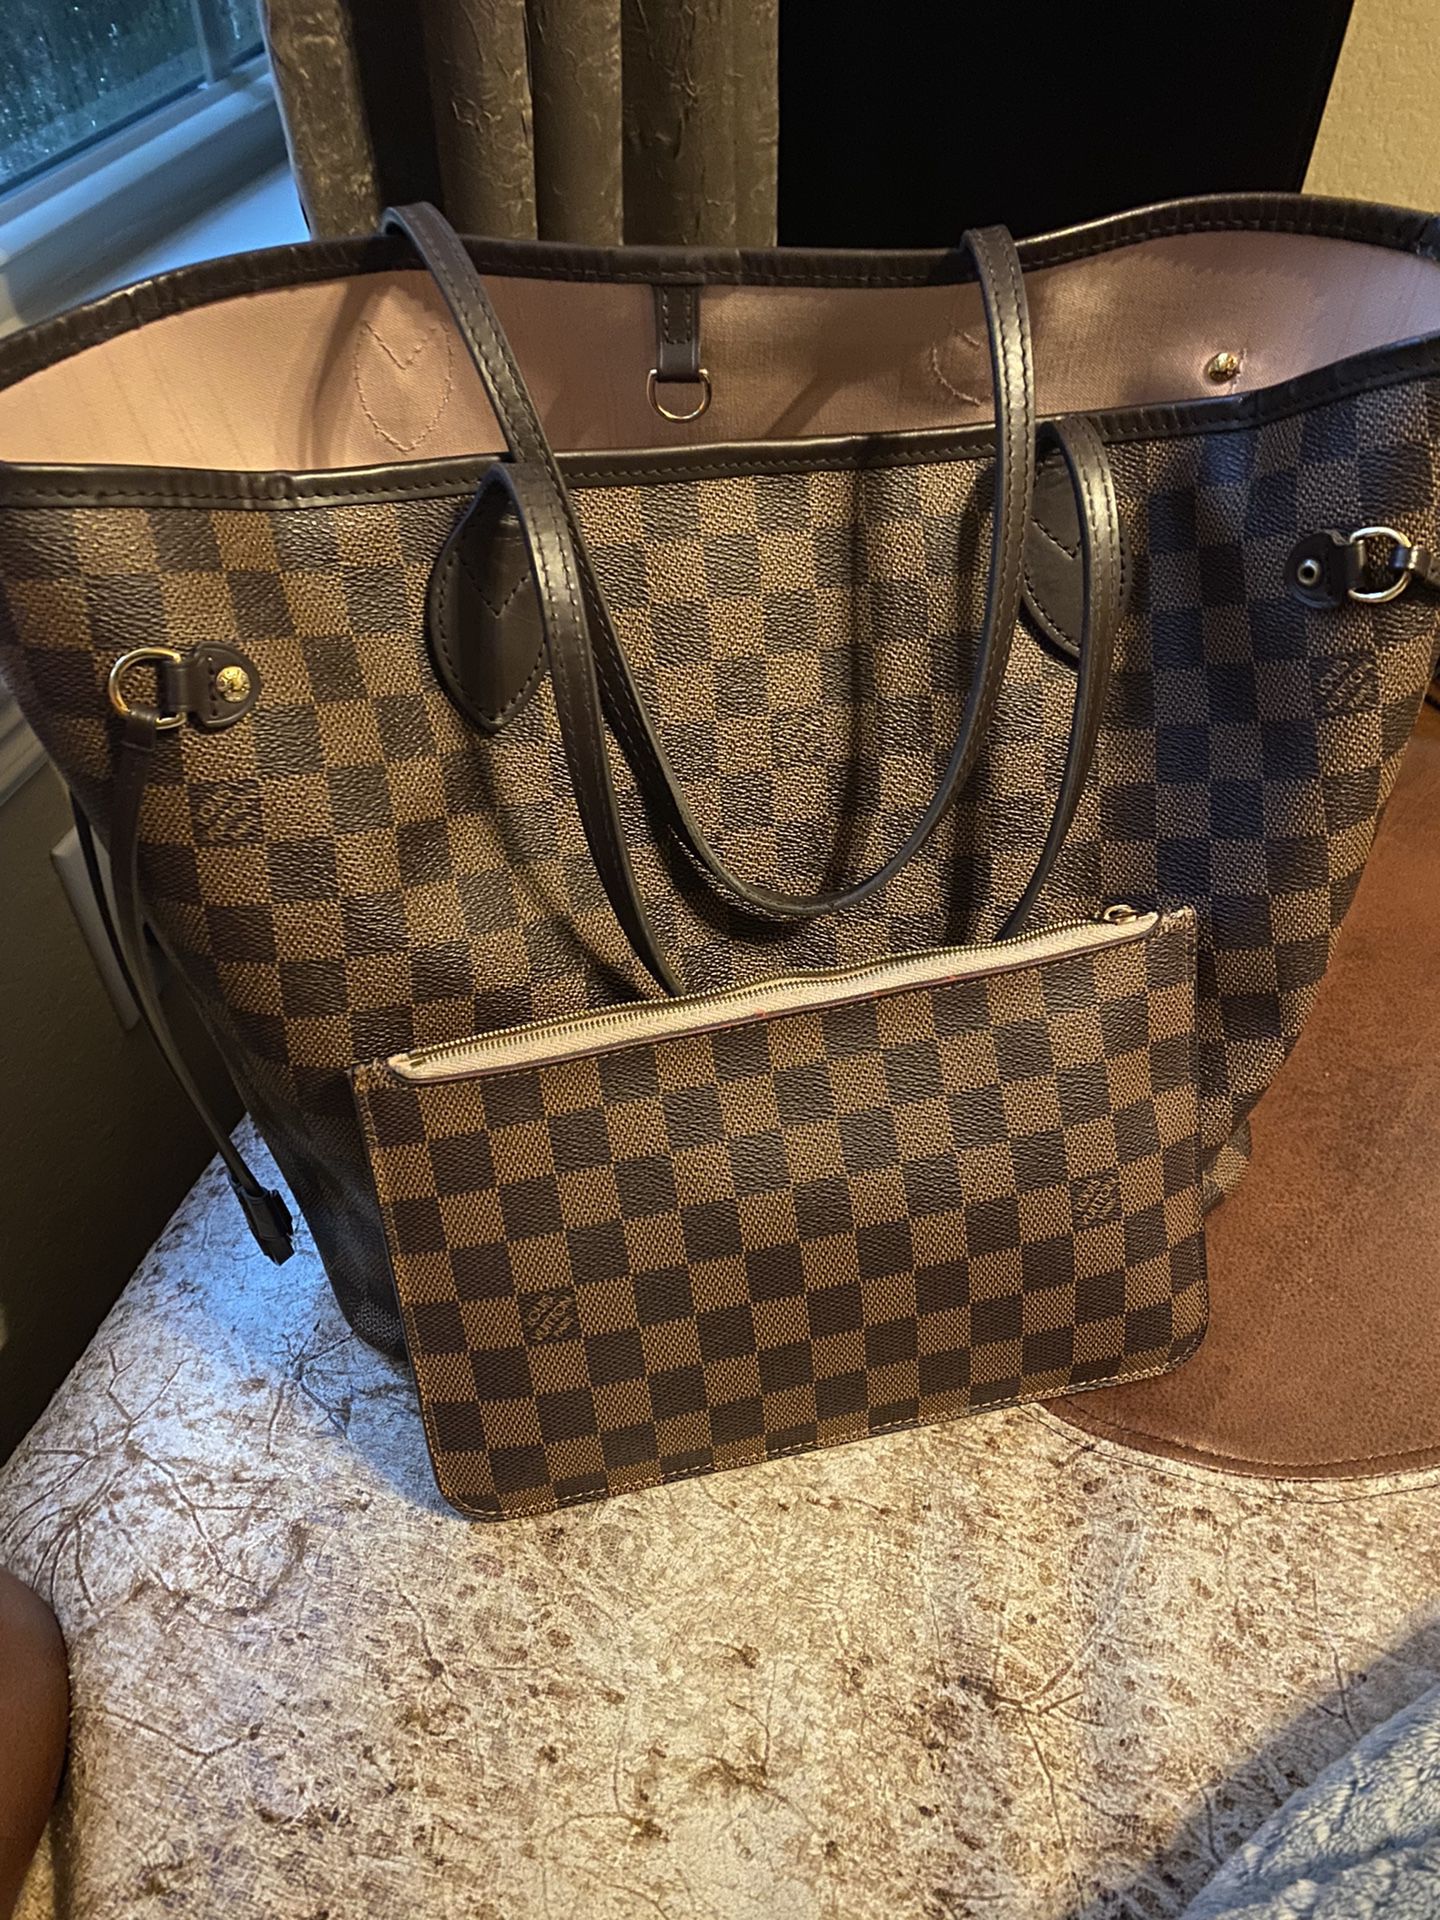 Authentic Louis Vuitton NEVERFULL mm for Sale in San Antonio